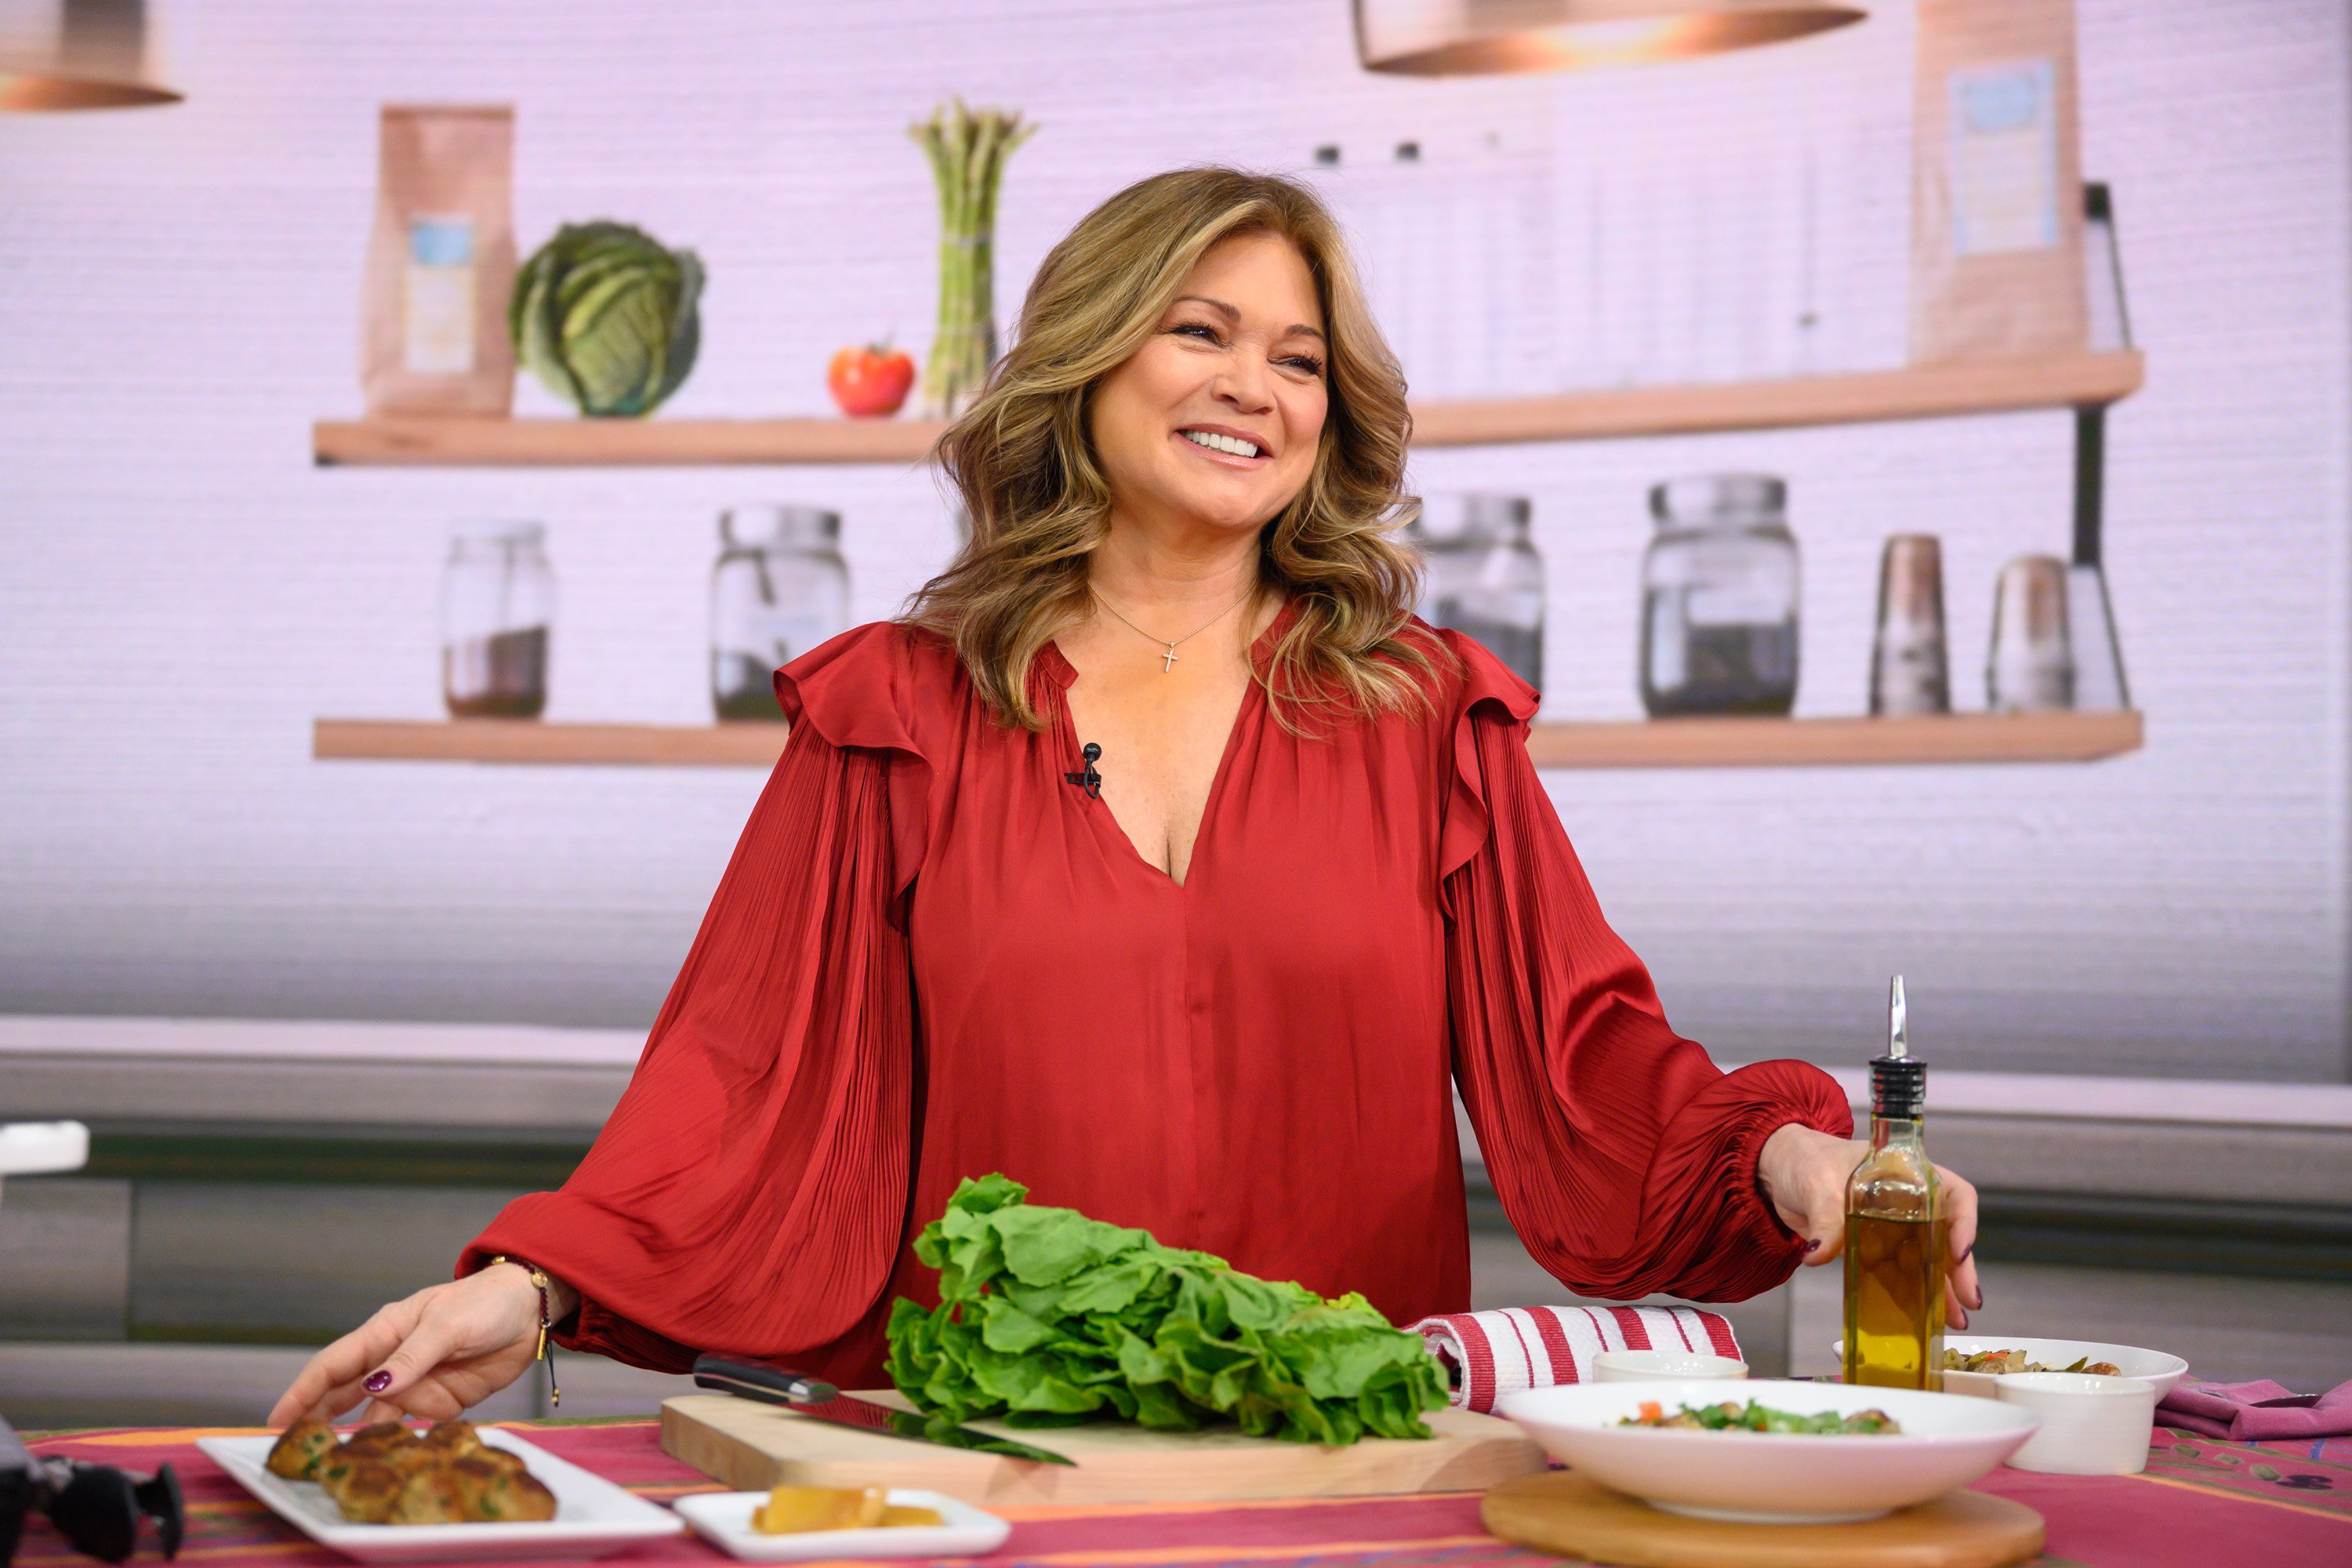 Valerie Bertinelli on Tuesday, January 7, 2020. | Source: Getty Images